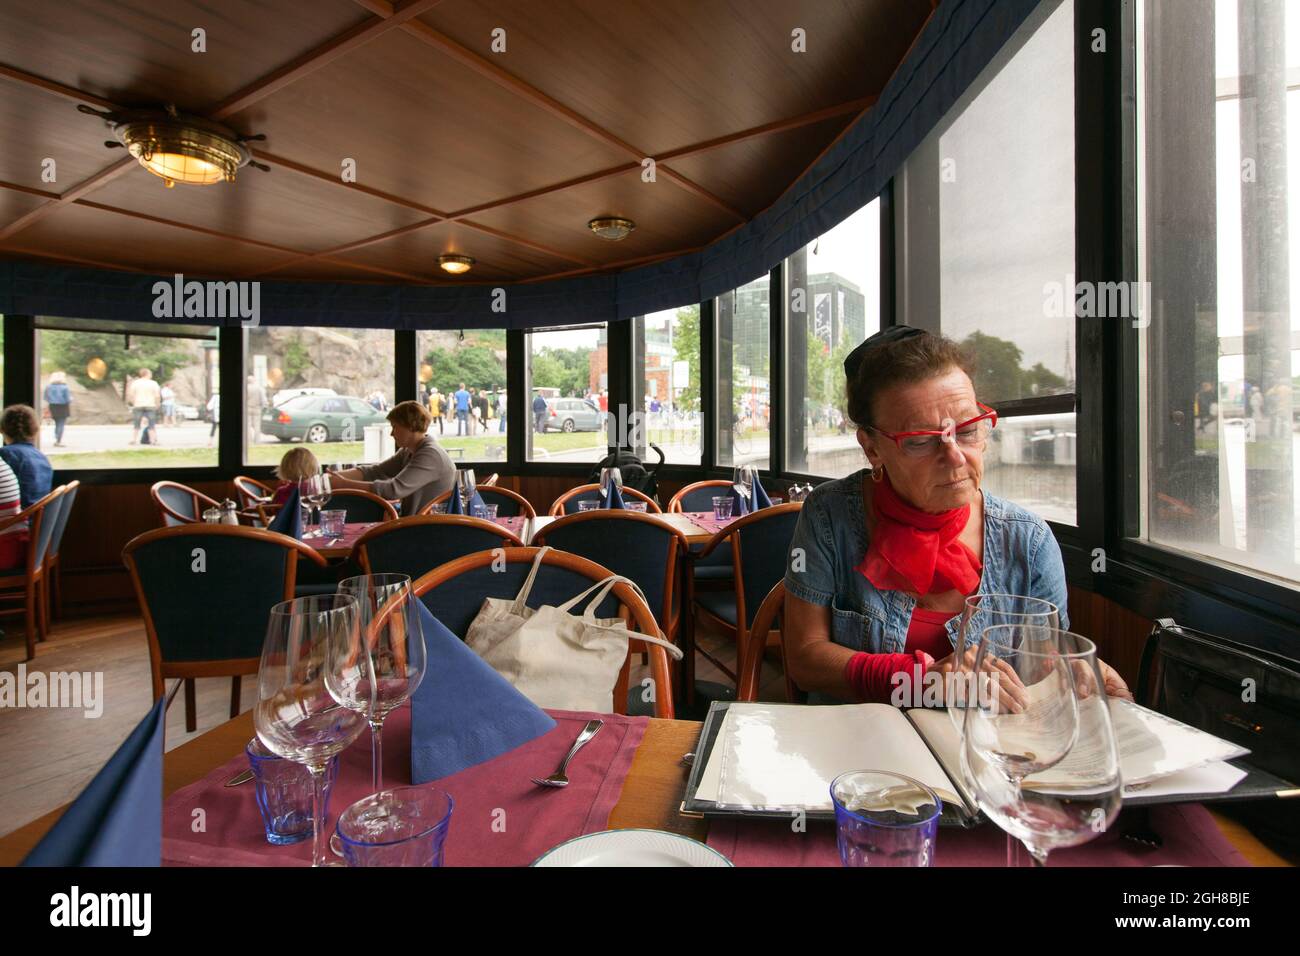 TURKU, FINLAND ON JUNE 29, 2013. Unidentified woman ready to order lunch. Furnishings and people in the background. Editorial Stock Photo